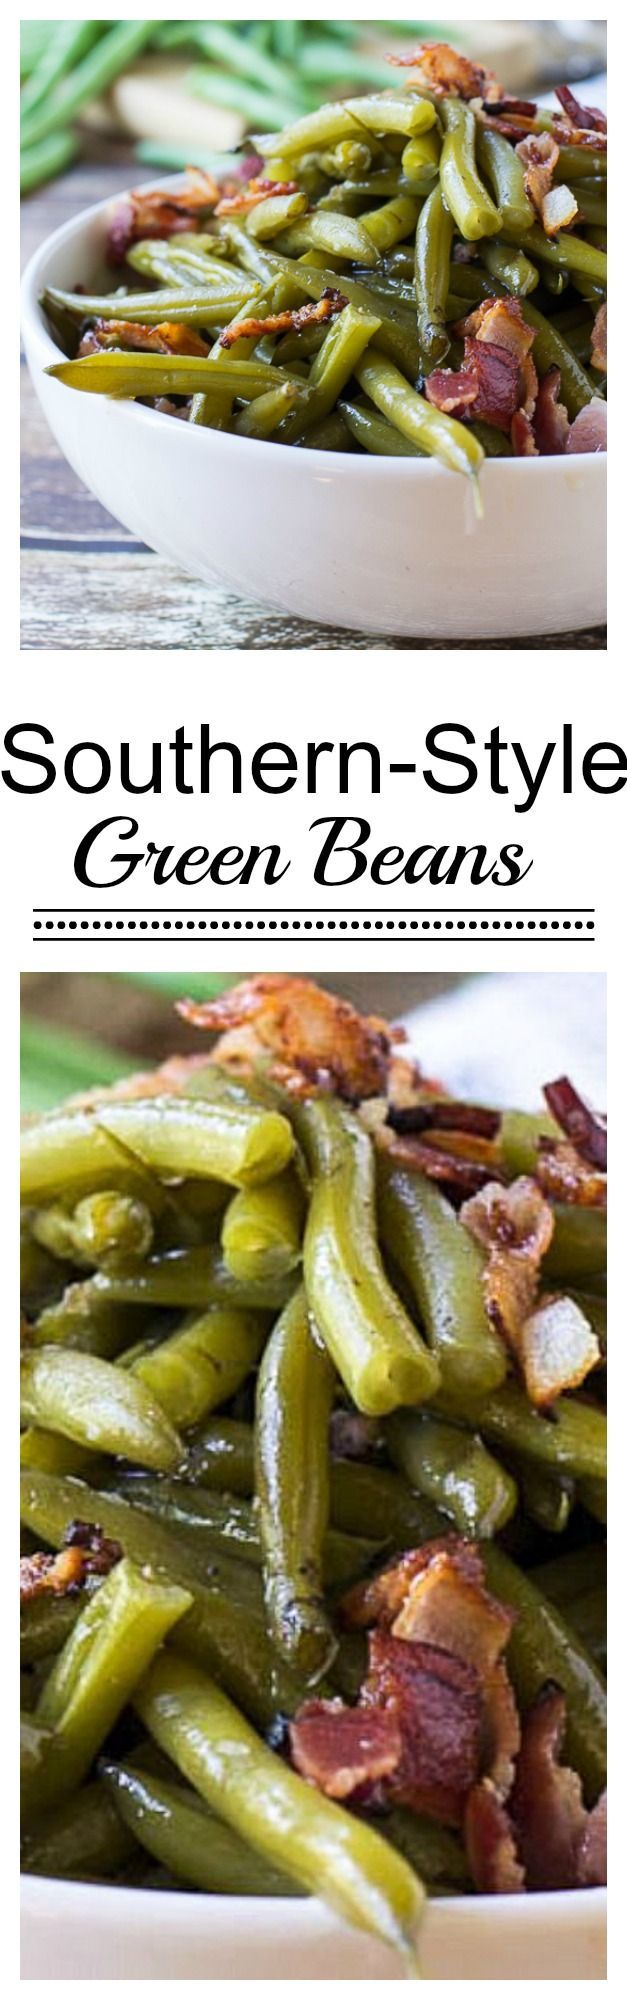 Southern-Style Green Beans with Bacon – cooked long and slow until melt-in-your-mouth tender!